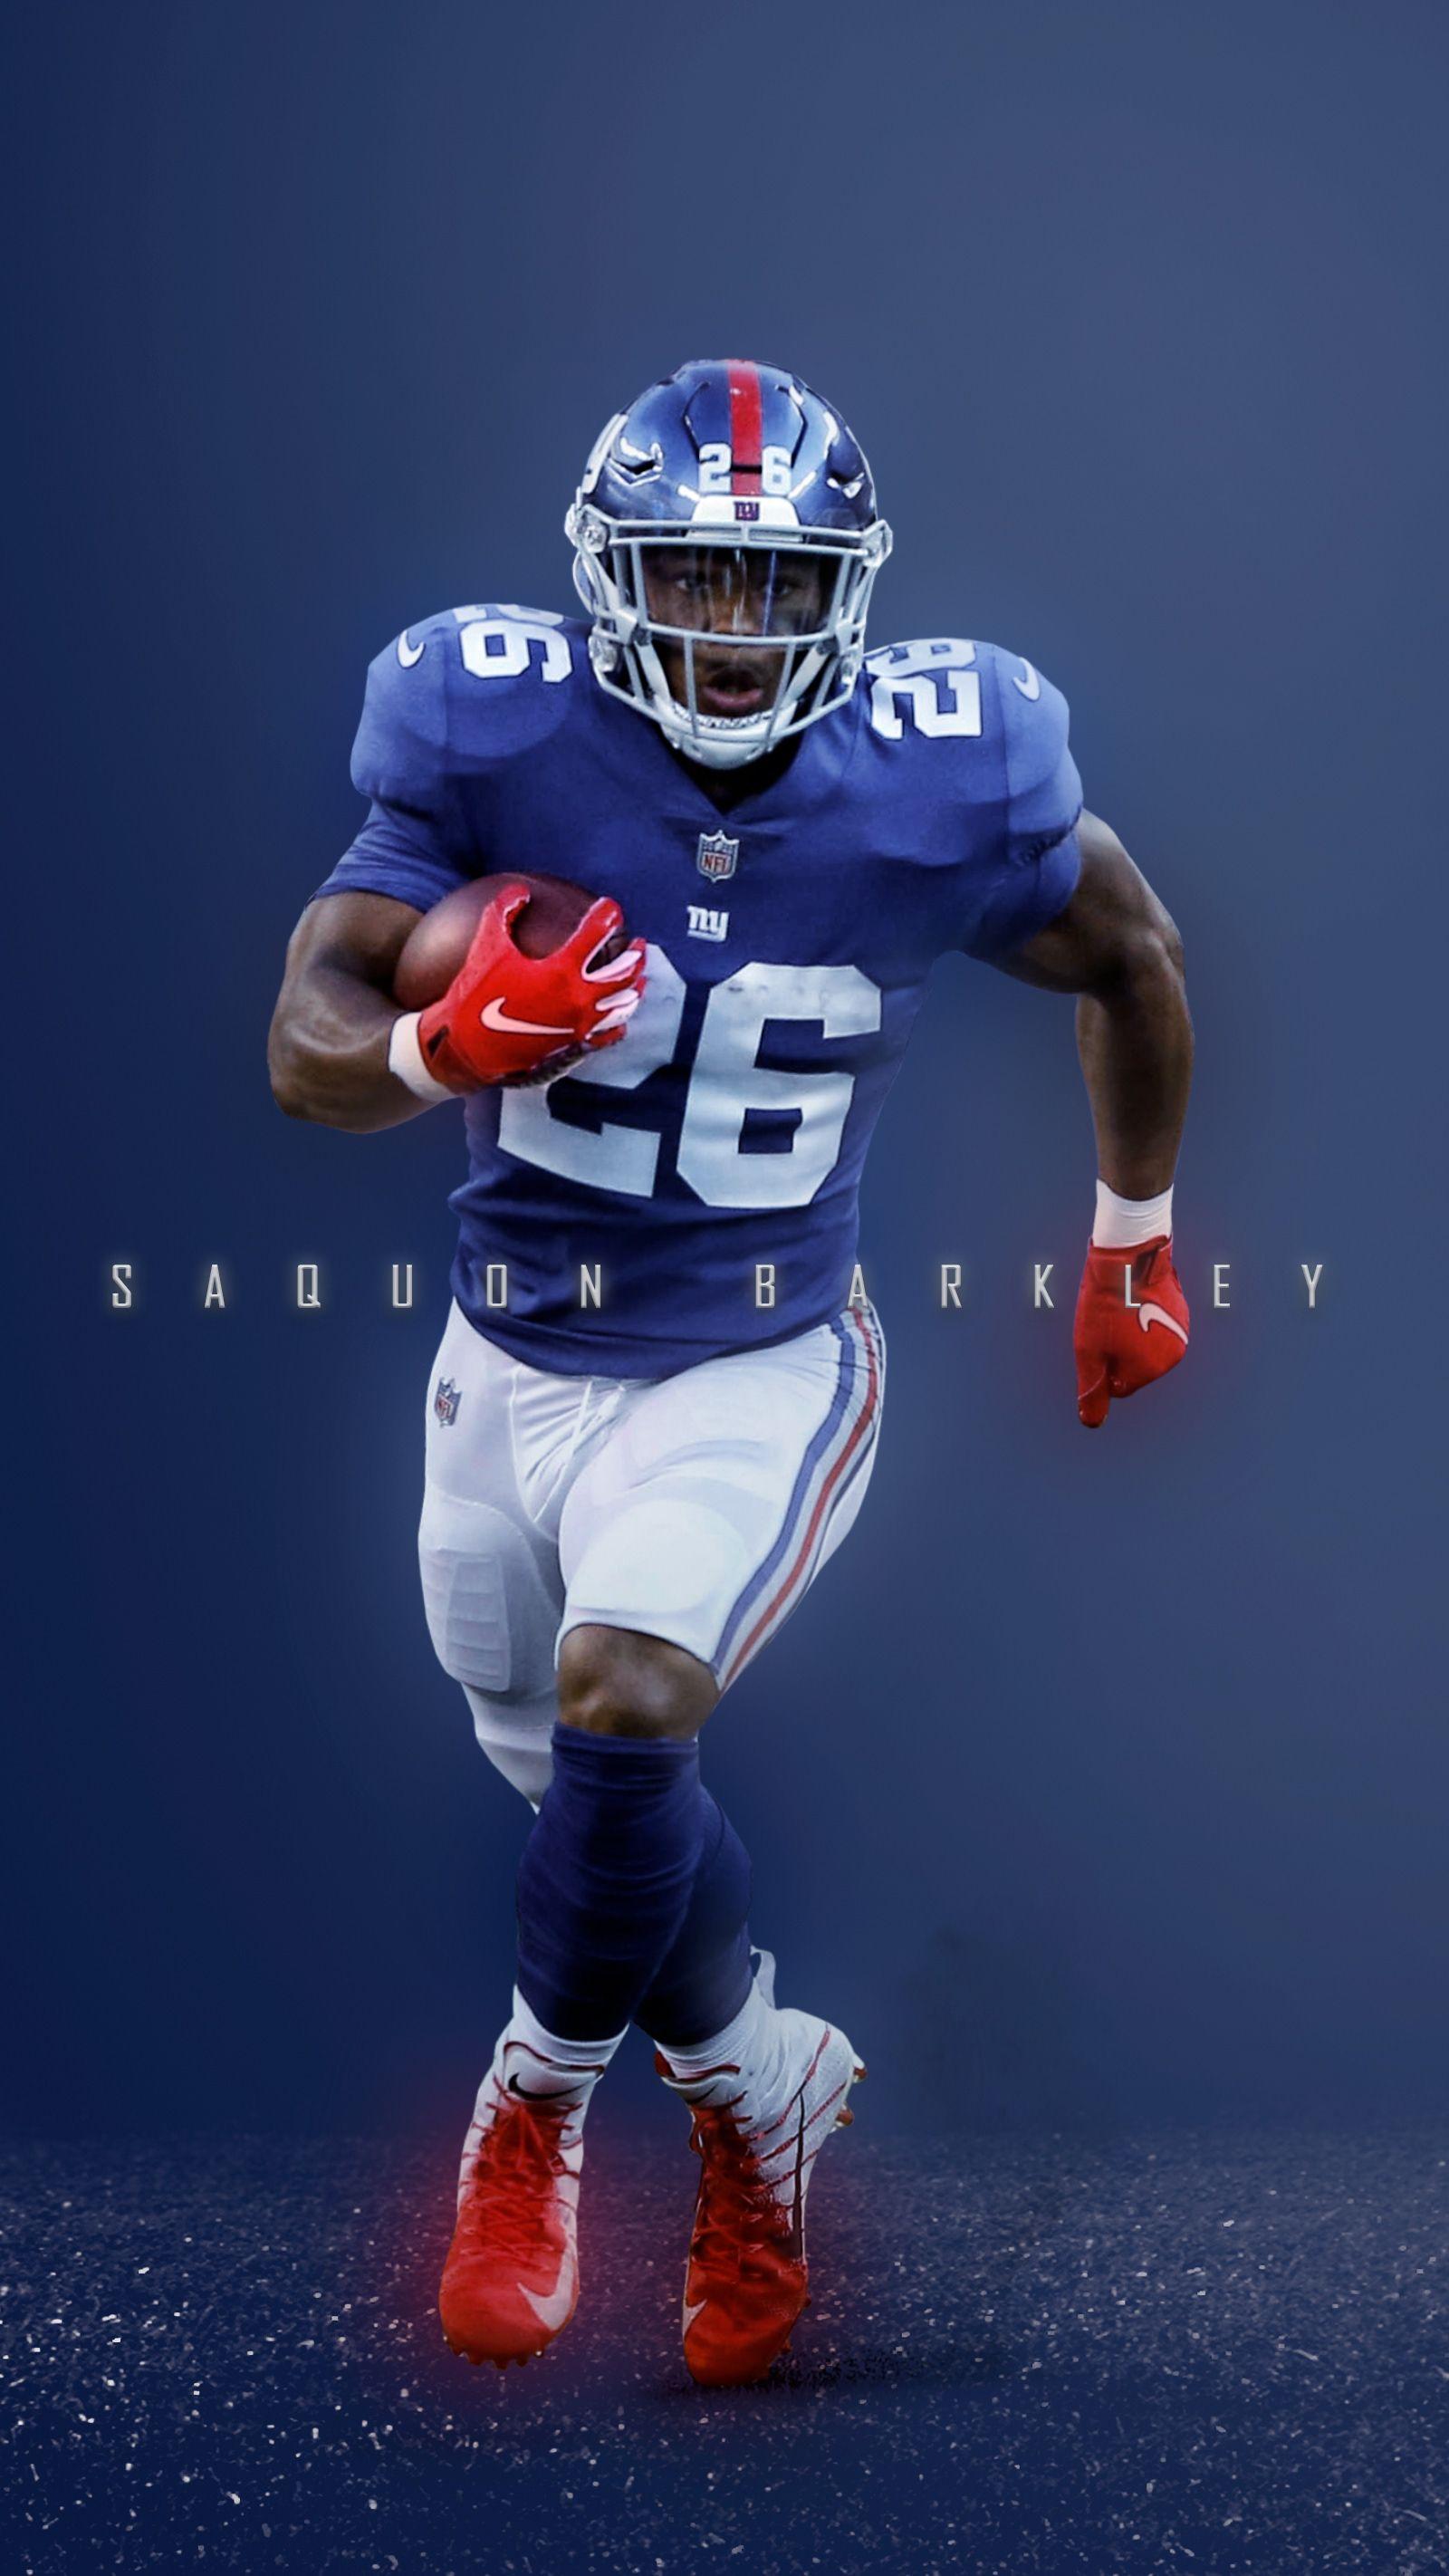 17+ Nfl Wallpapers